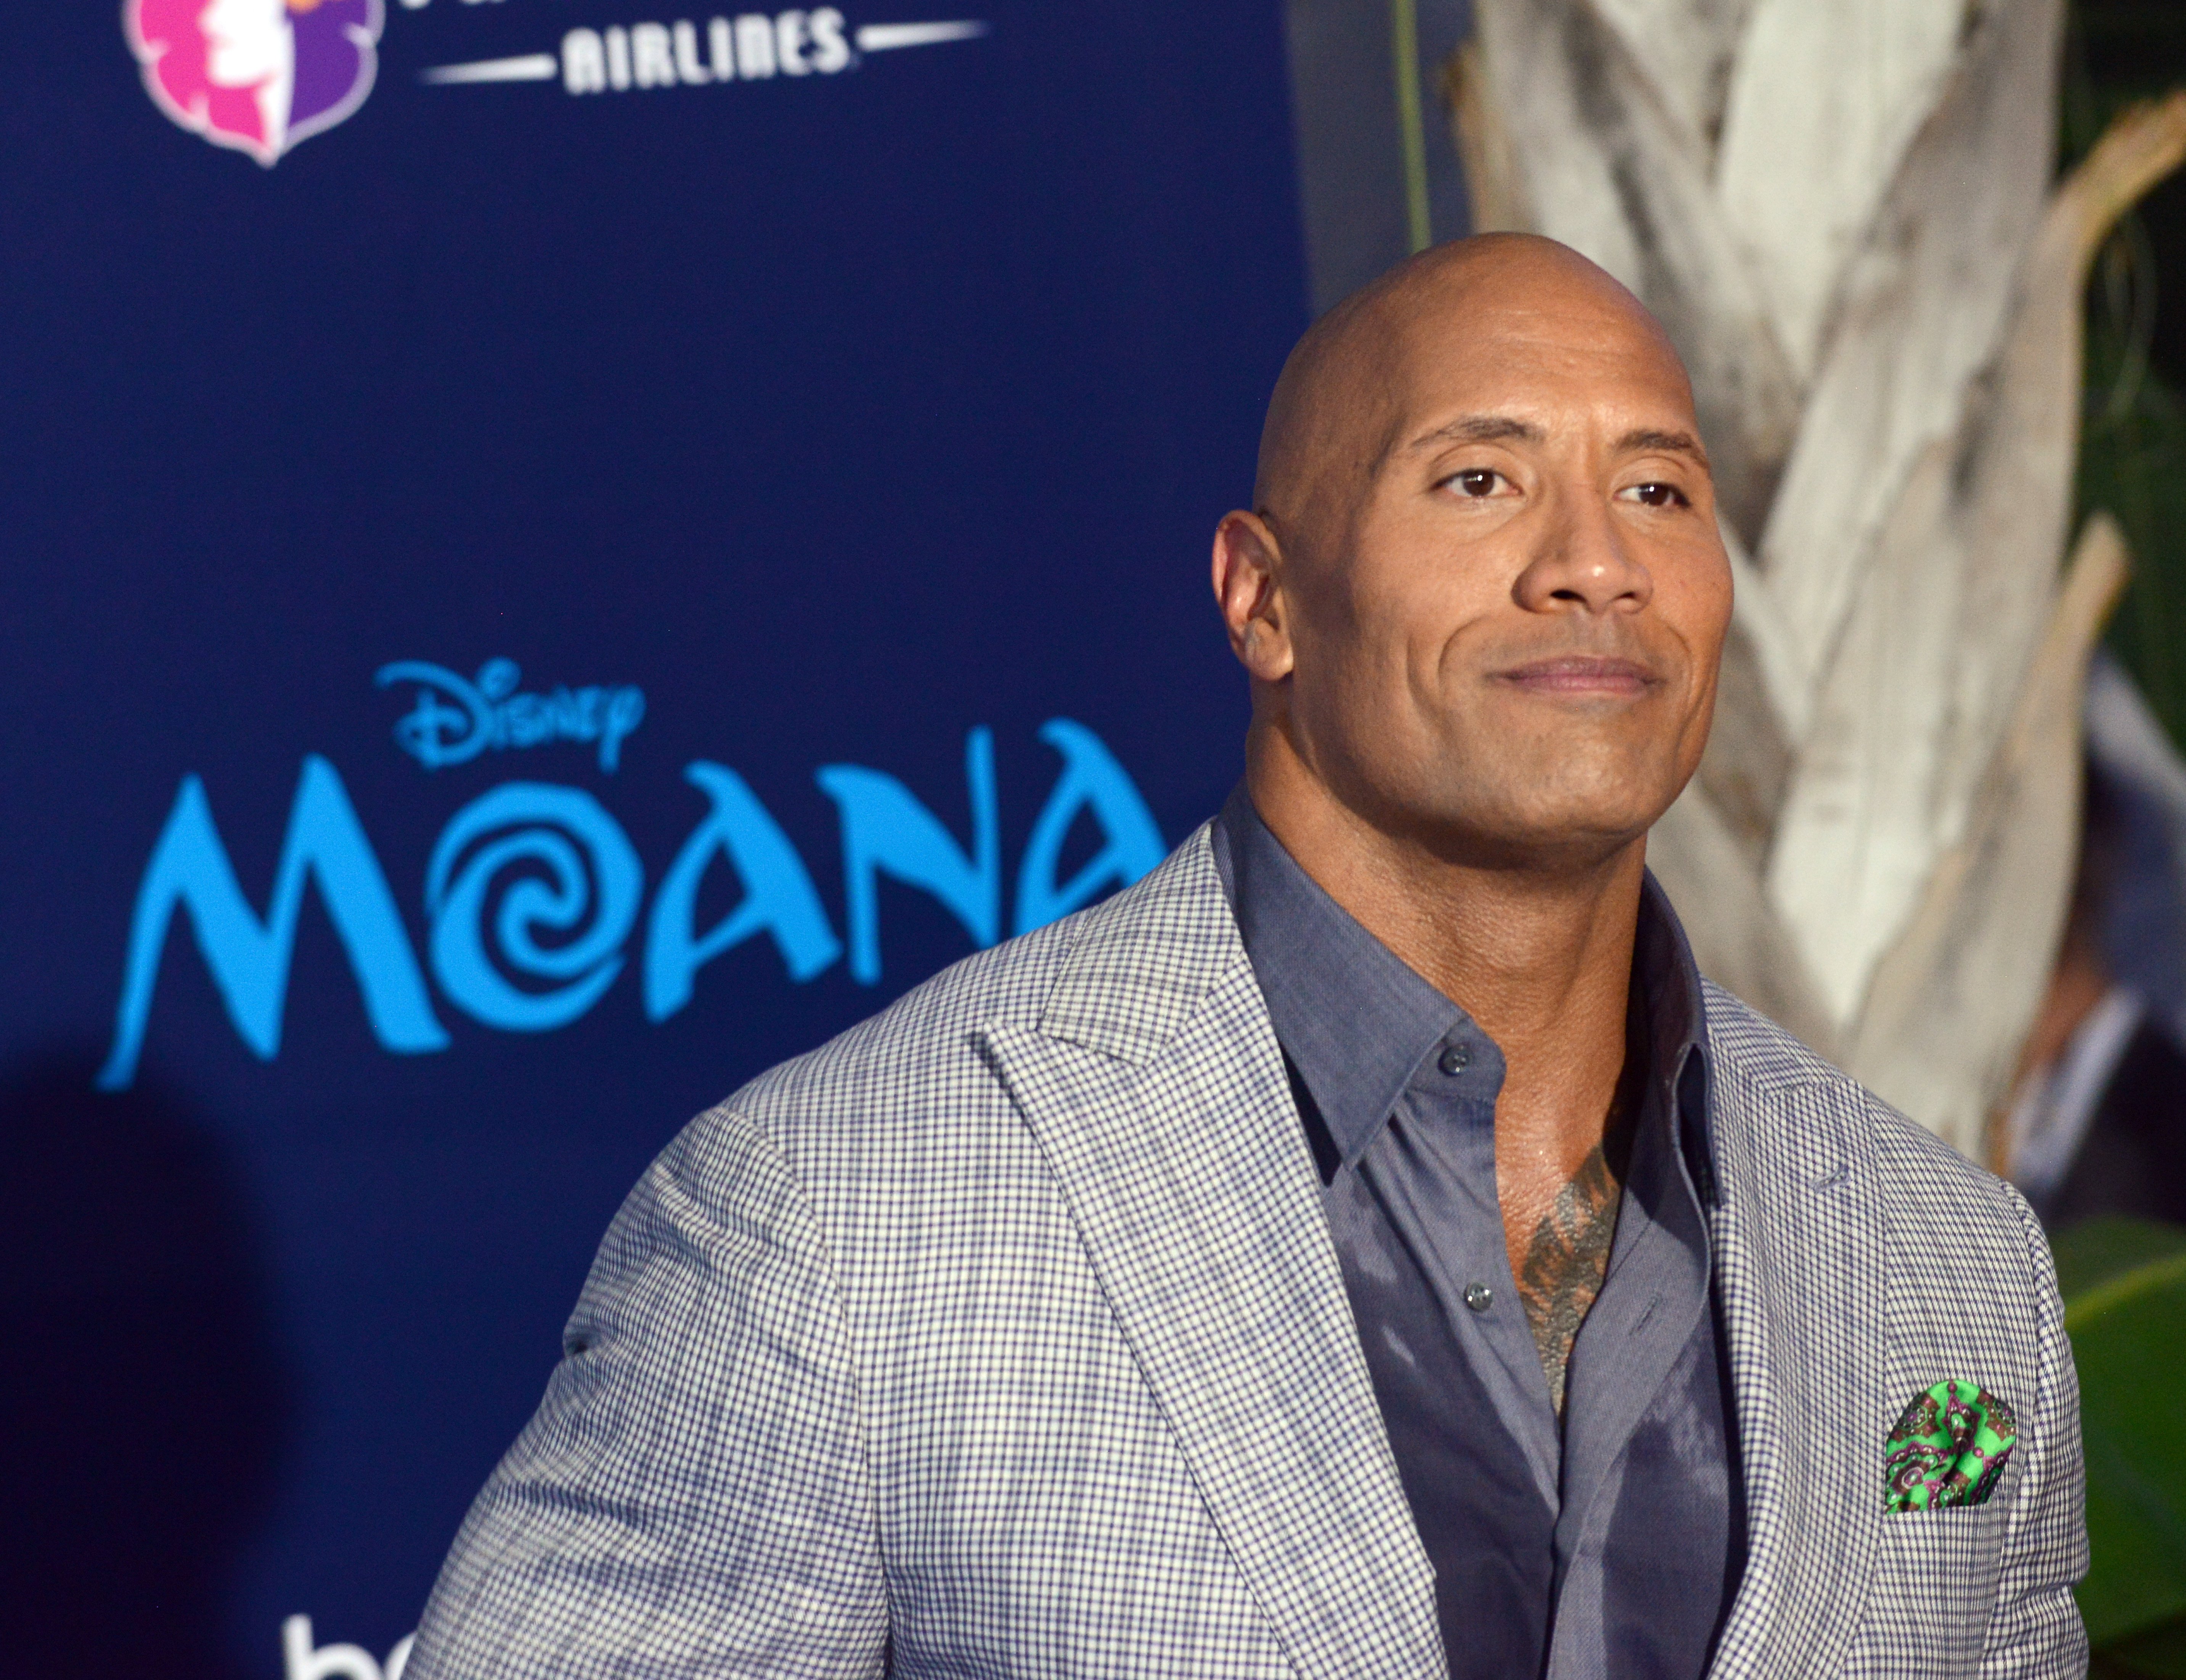 Dwayne Johnson attends the Disney premiere of "Moana" at AFI FEST 2016 in Hollywood, California, in November 2016. | Photo: Getty Images